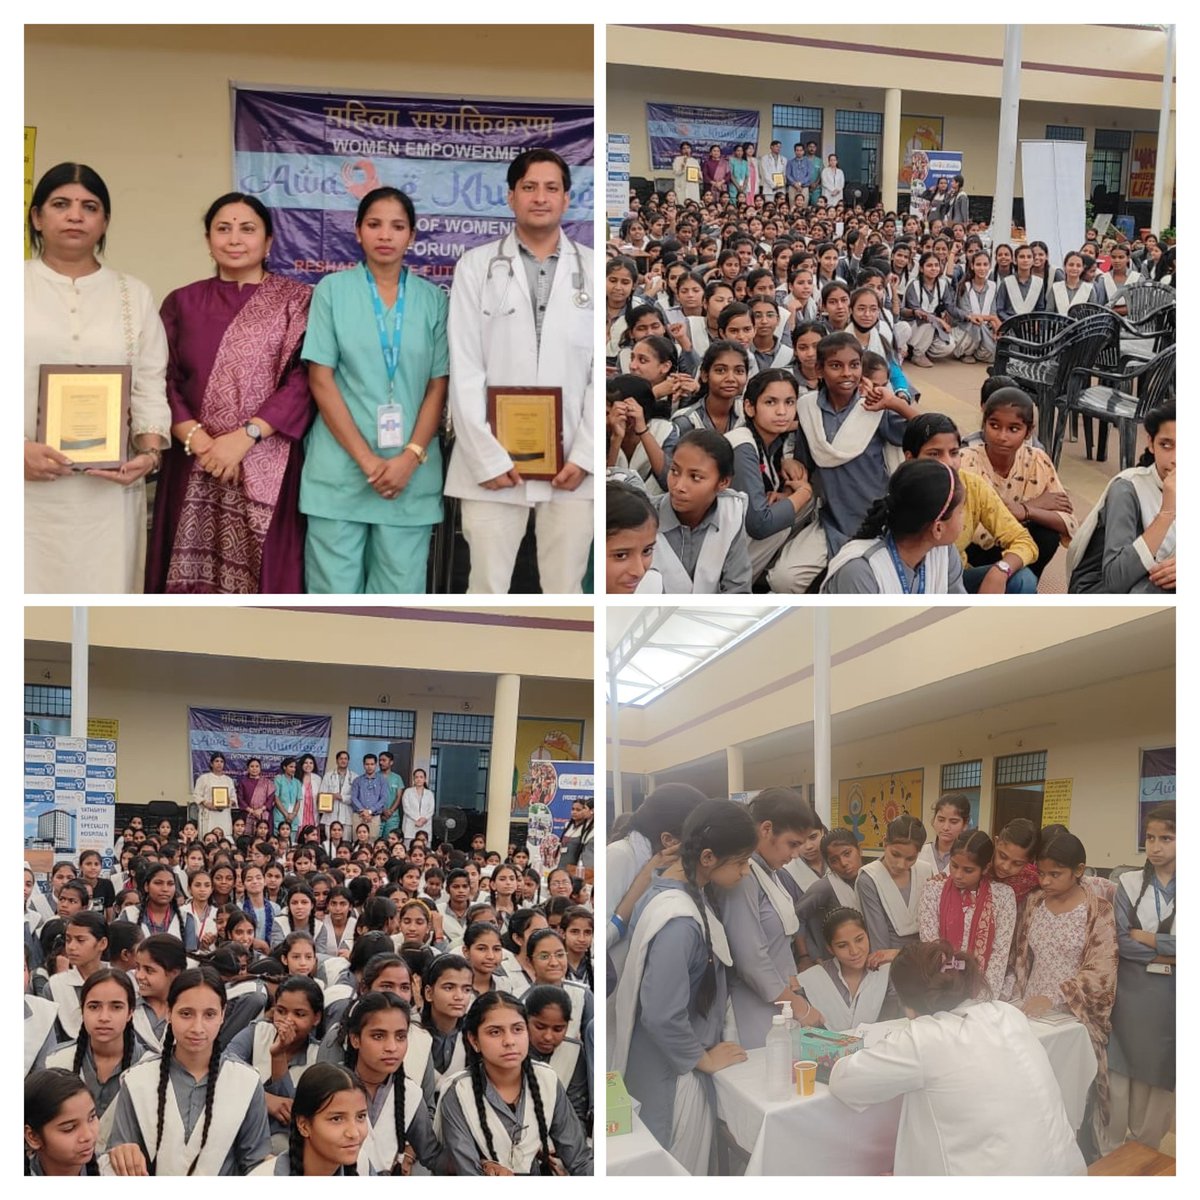 Excited to share!  Today, on May 10, #Awazekhwateen teamed up with Yatharth Hospital for a health camp at the Government Girls Inter College in Saharanpur, Uttar Pradesh. Promoting wellness and healthcare accessibility in our community. #HealthCamp #CommunityHealth #Saharanpur